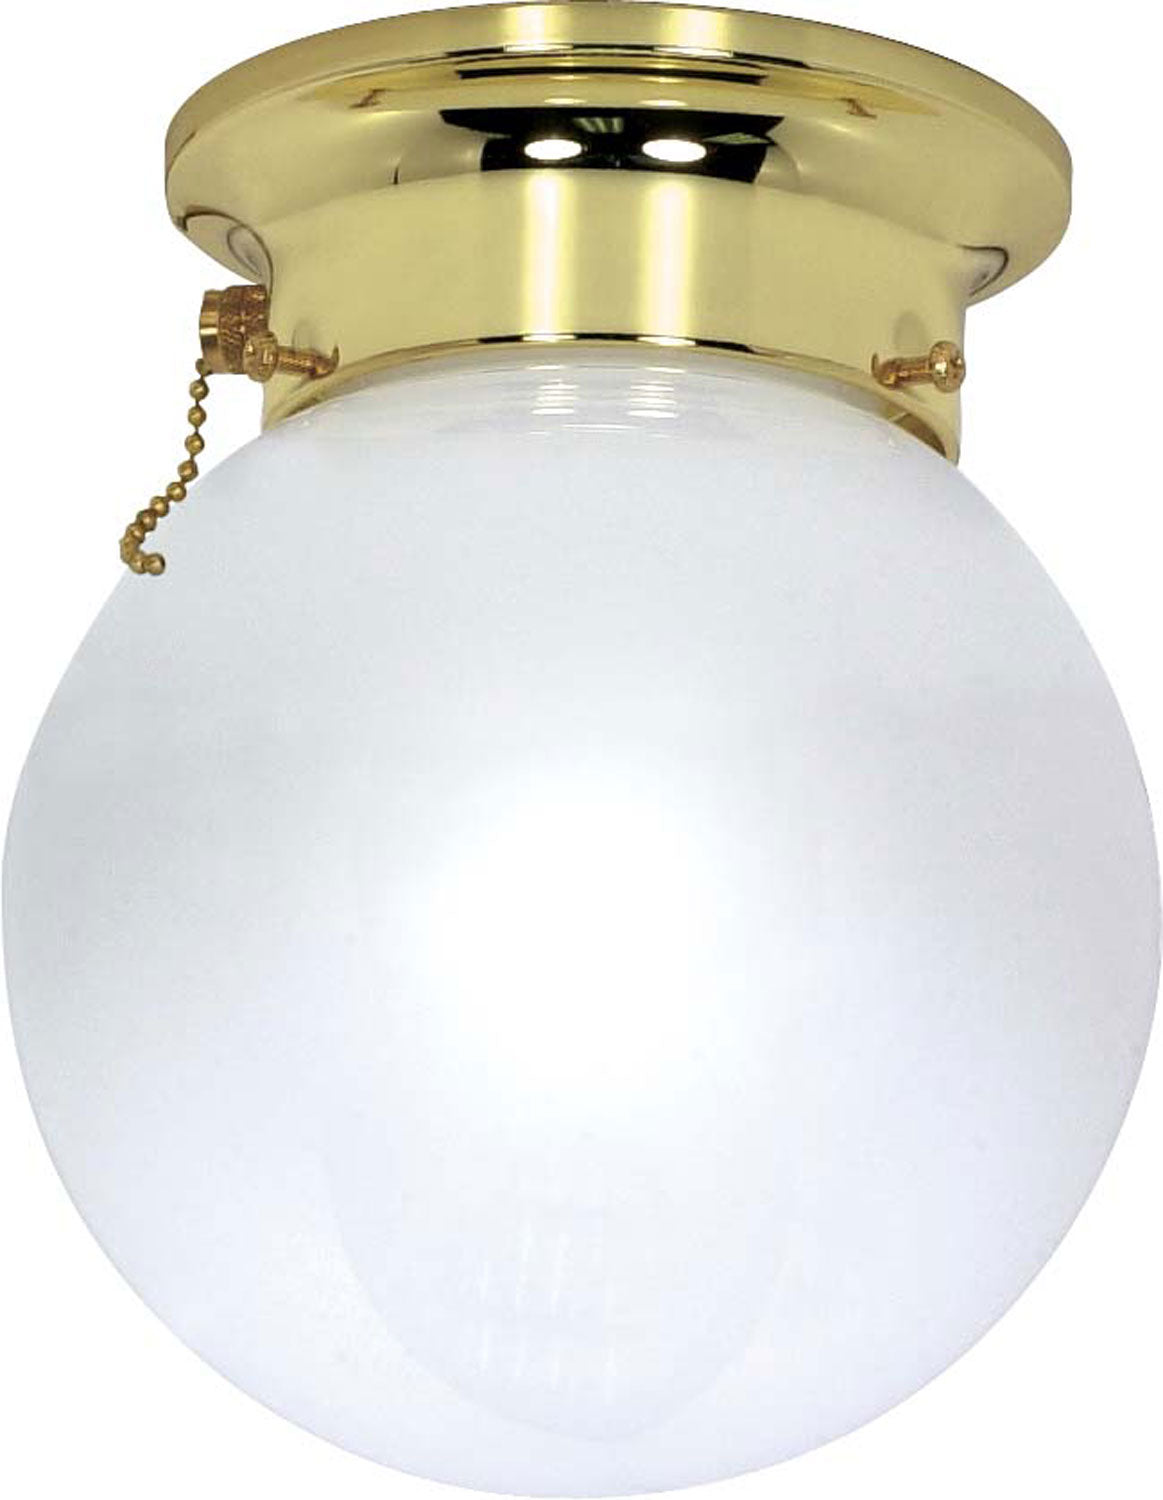 Nuvo 8 White Ball 60-295 Ceiling Light - Polished Brass